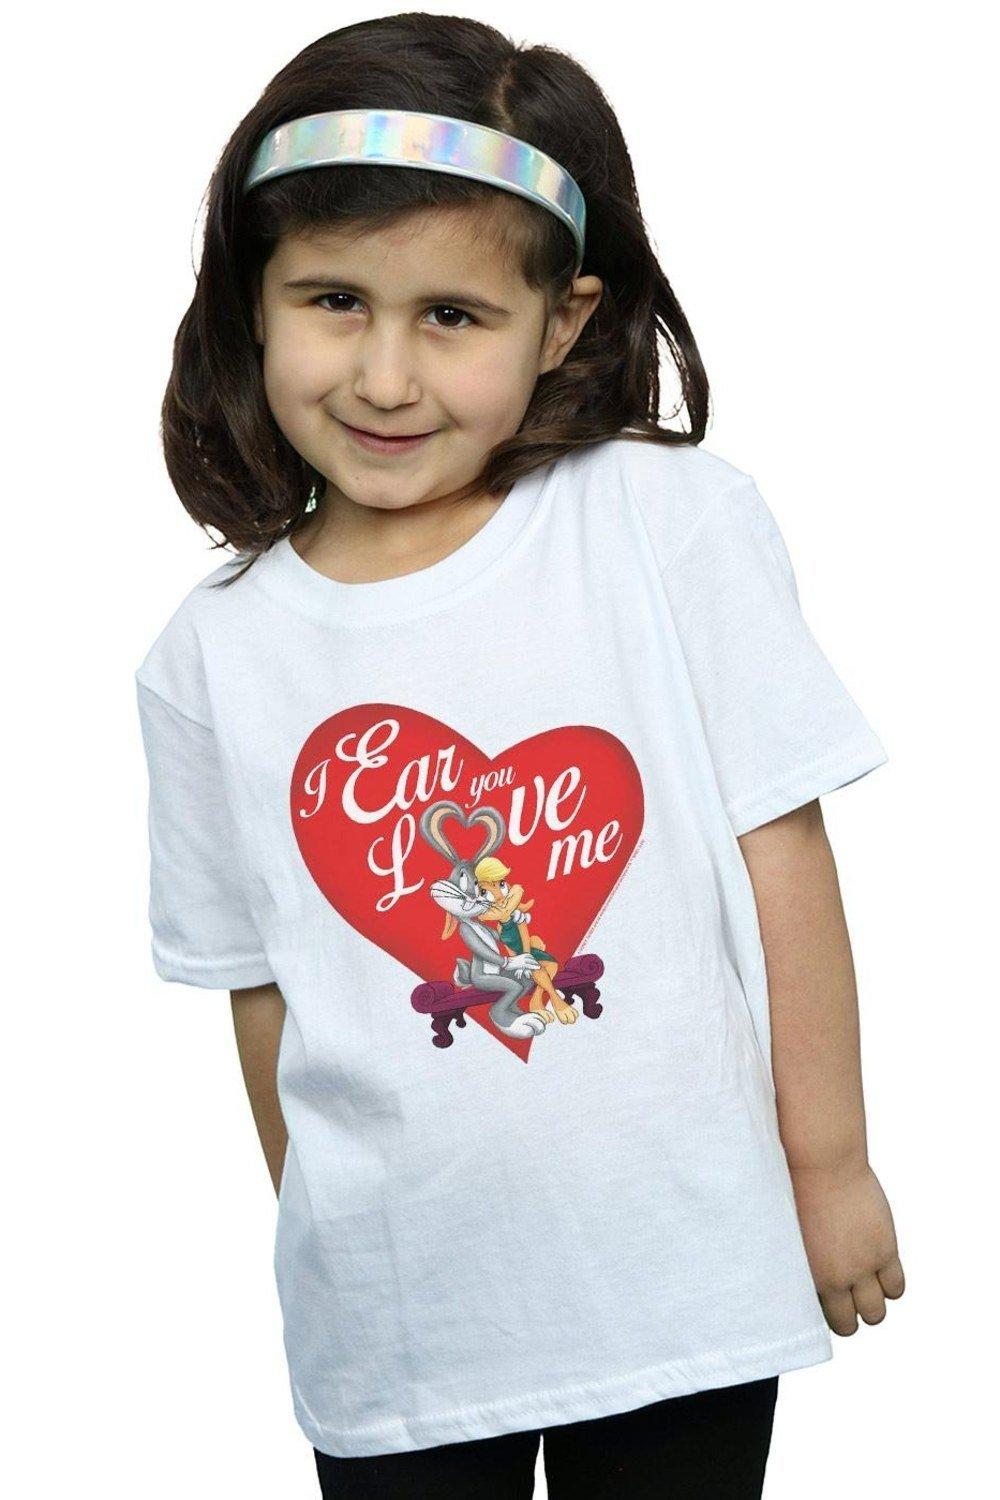 Bugs Bunny And Lola Valentine’s Day Love Me Cotton T-Shirt